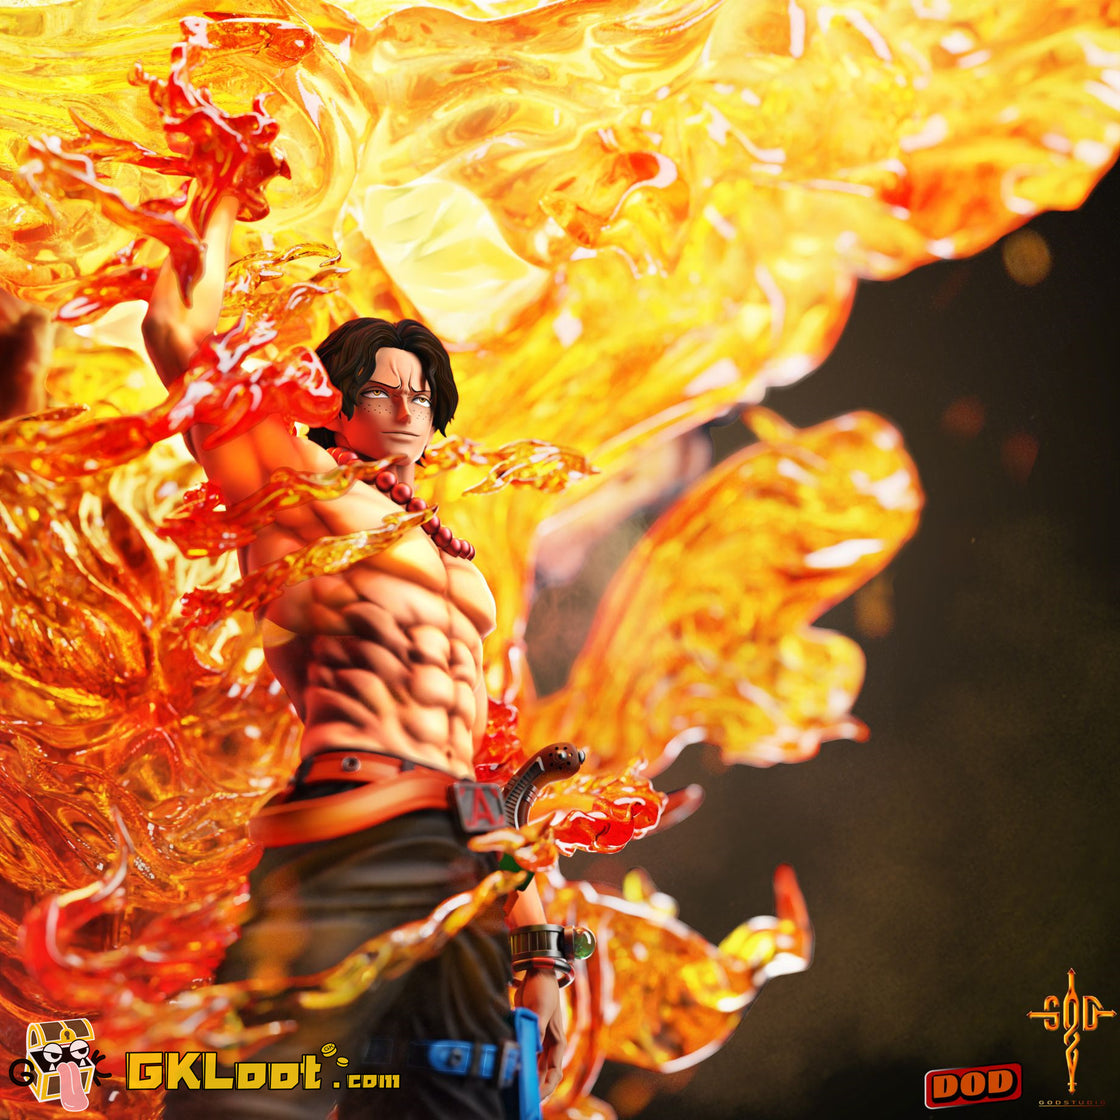 [Out of stock] DOD&GOD Studio One Piece Portgas D. Ace Statue w/ LED